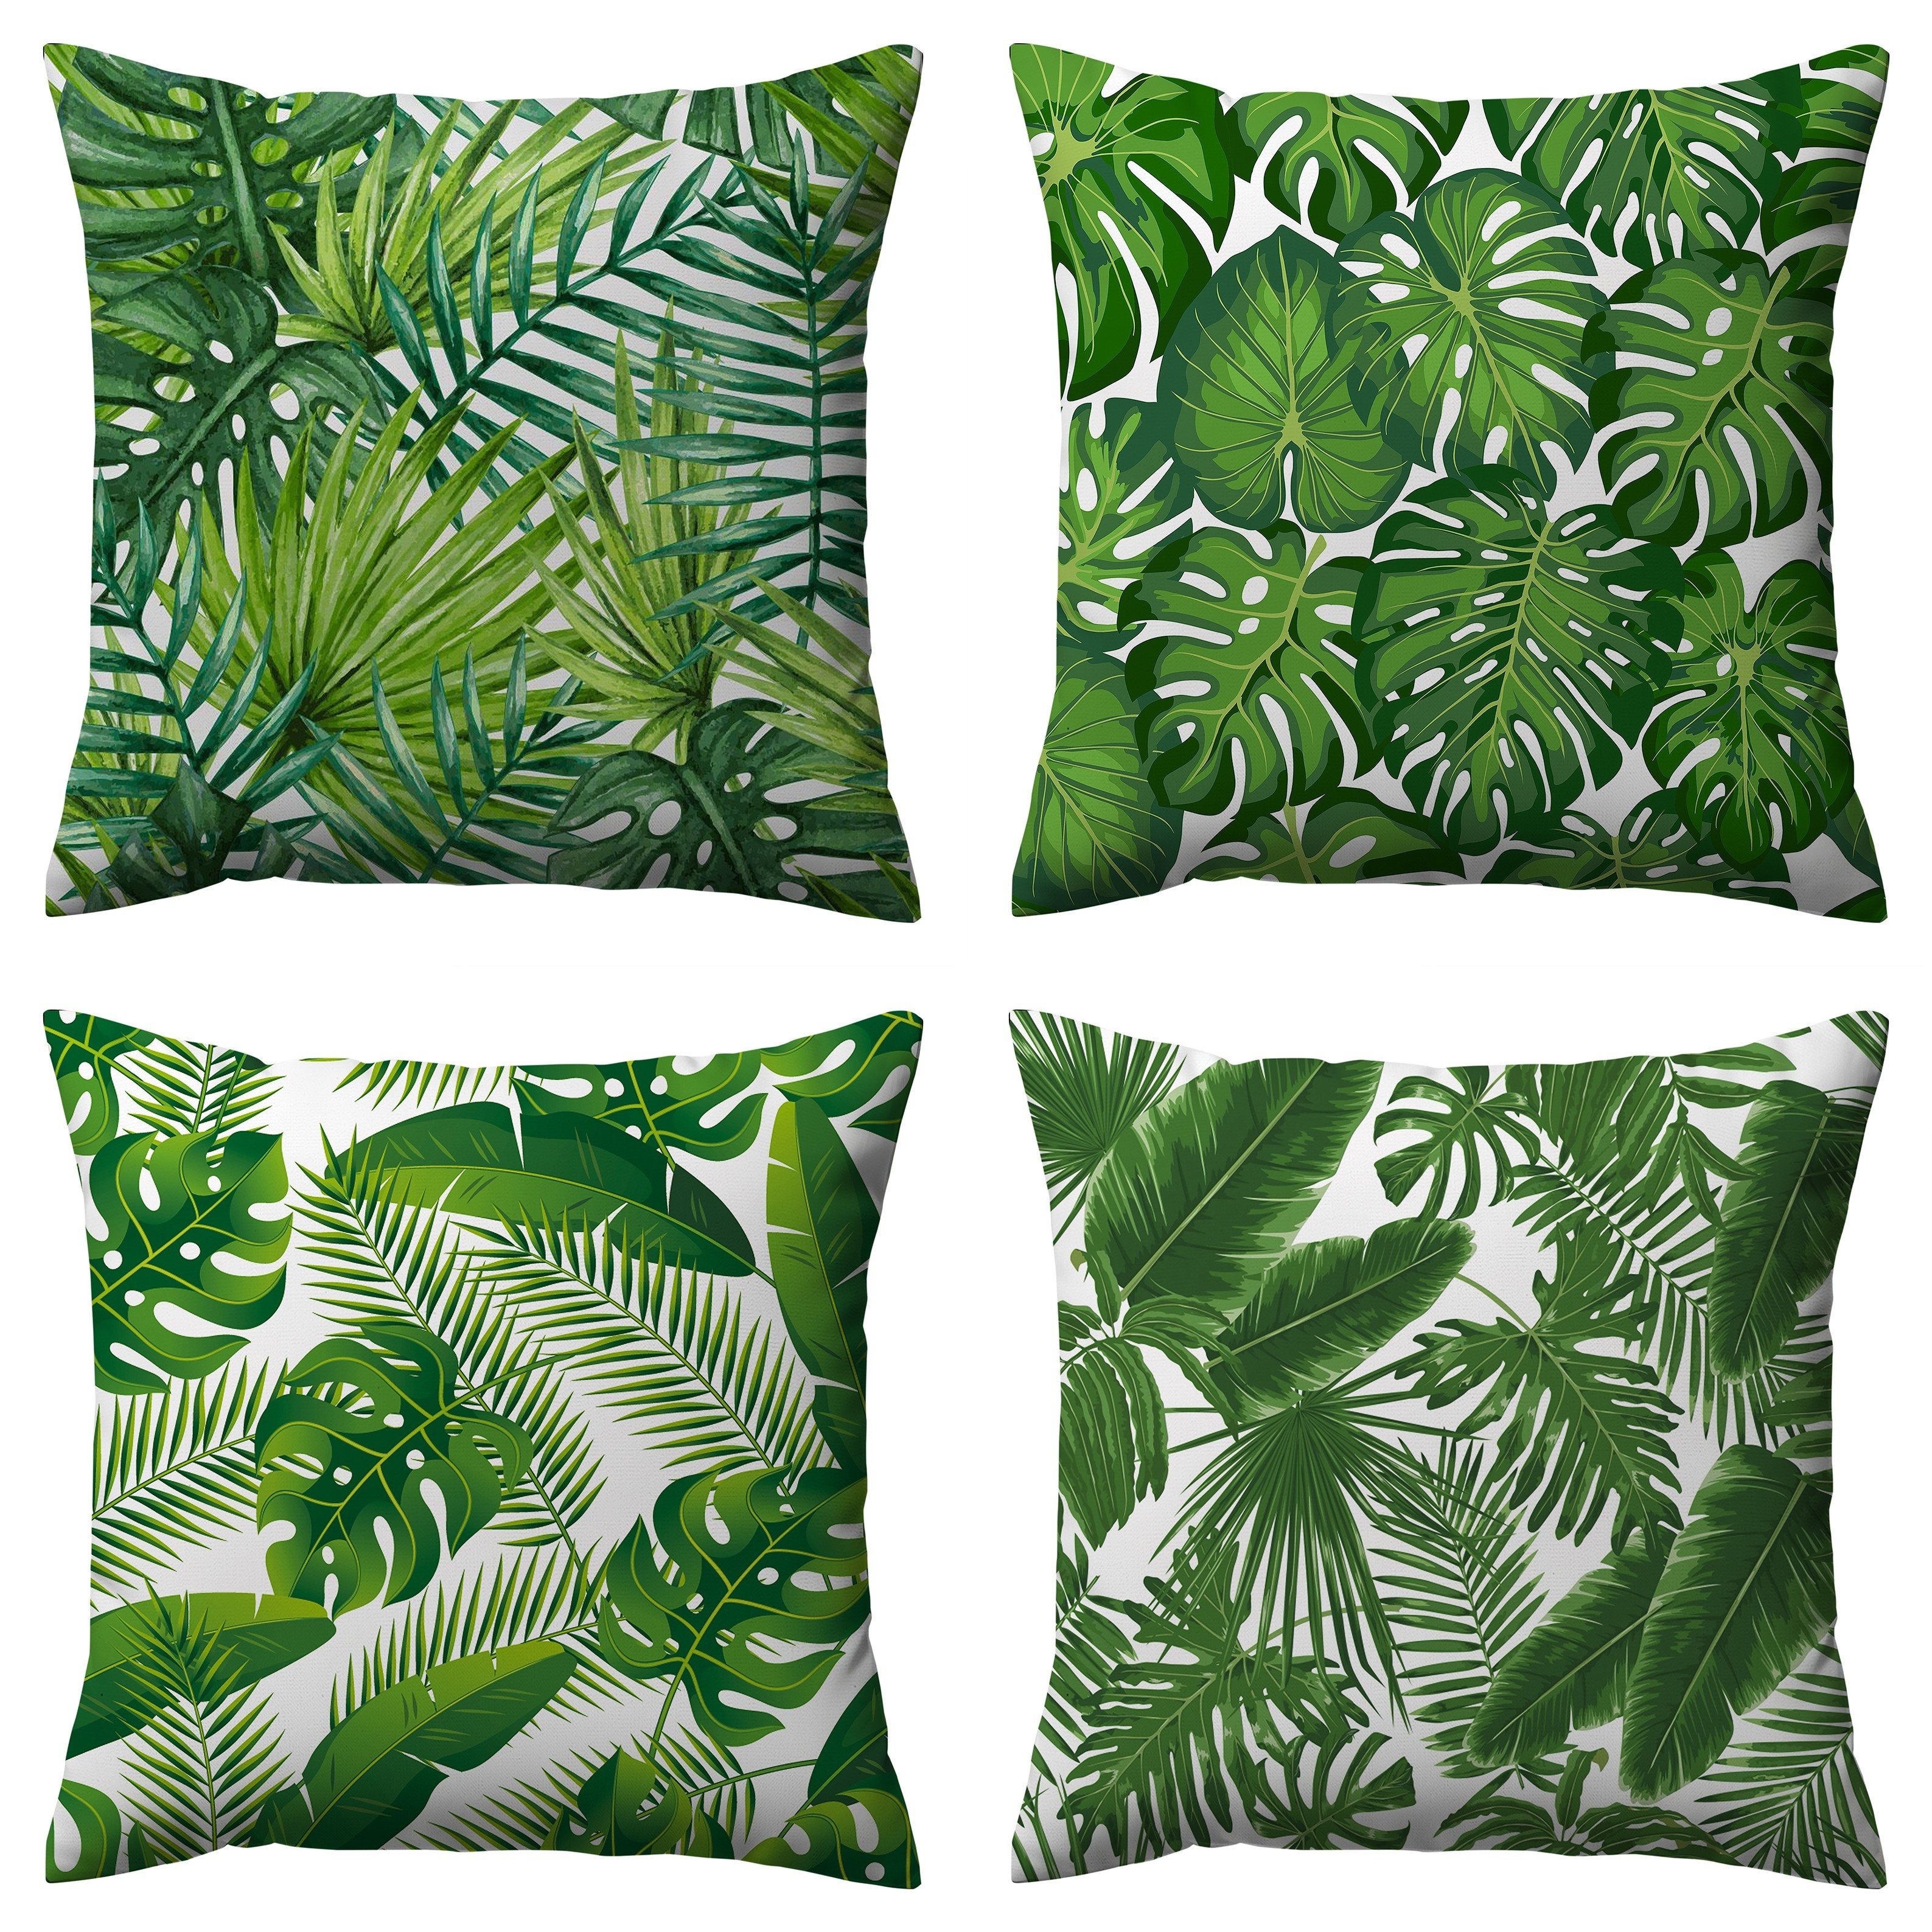 

4pcs, Green Tropical Leaves Throw Pillow Covers, Set Of 4 18x18 Summer Palm Tree Durable Sturdy Decorative Linen Square Pillowcase With Hidden Zipper For Living Room Sofa Couch Bench Car Decor